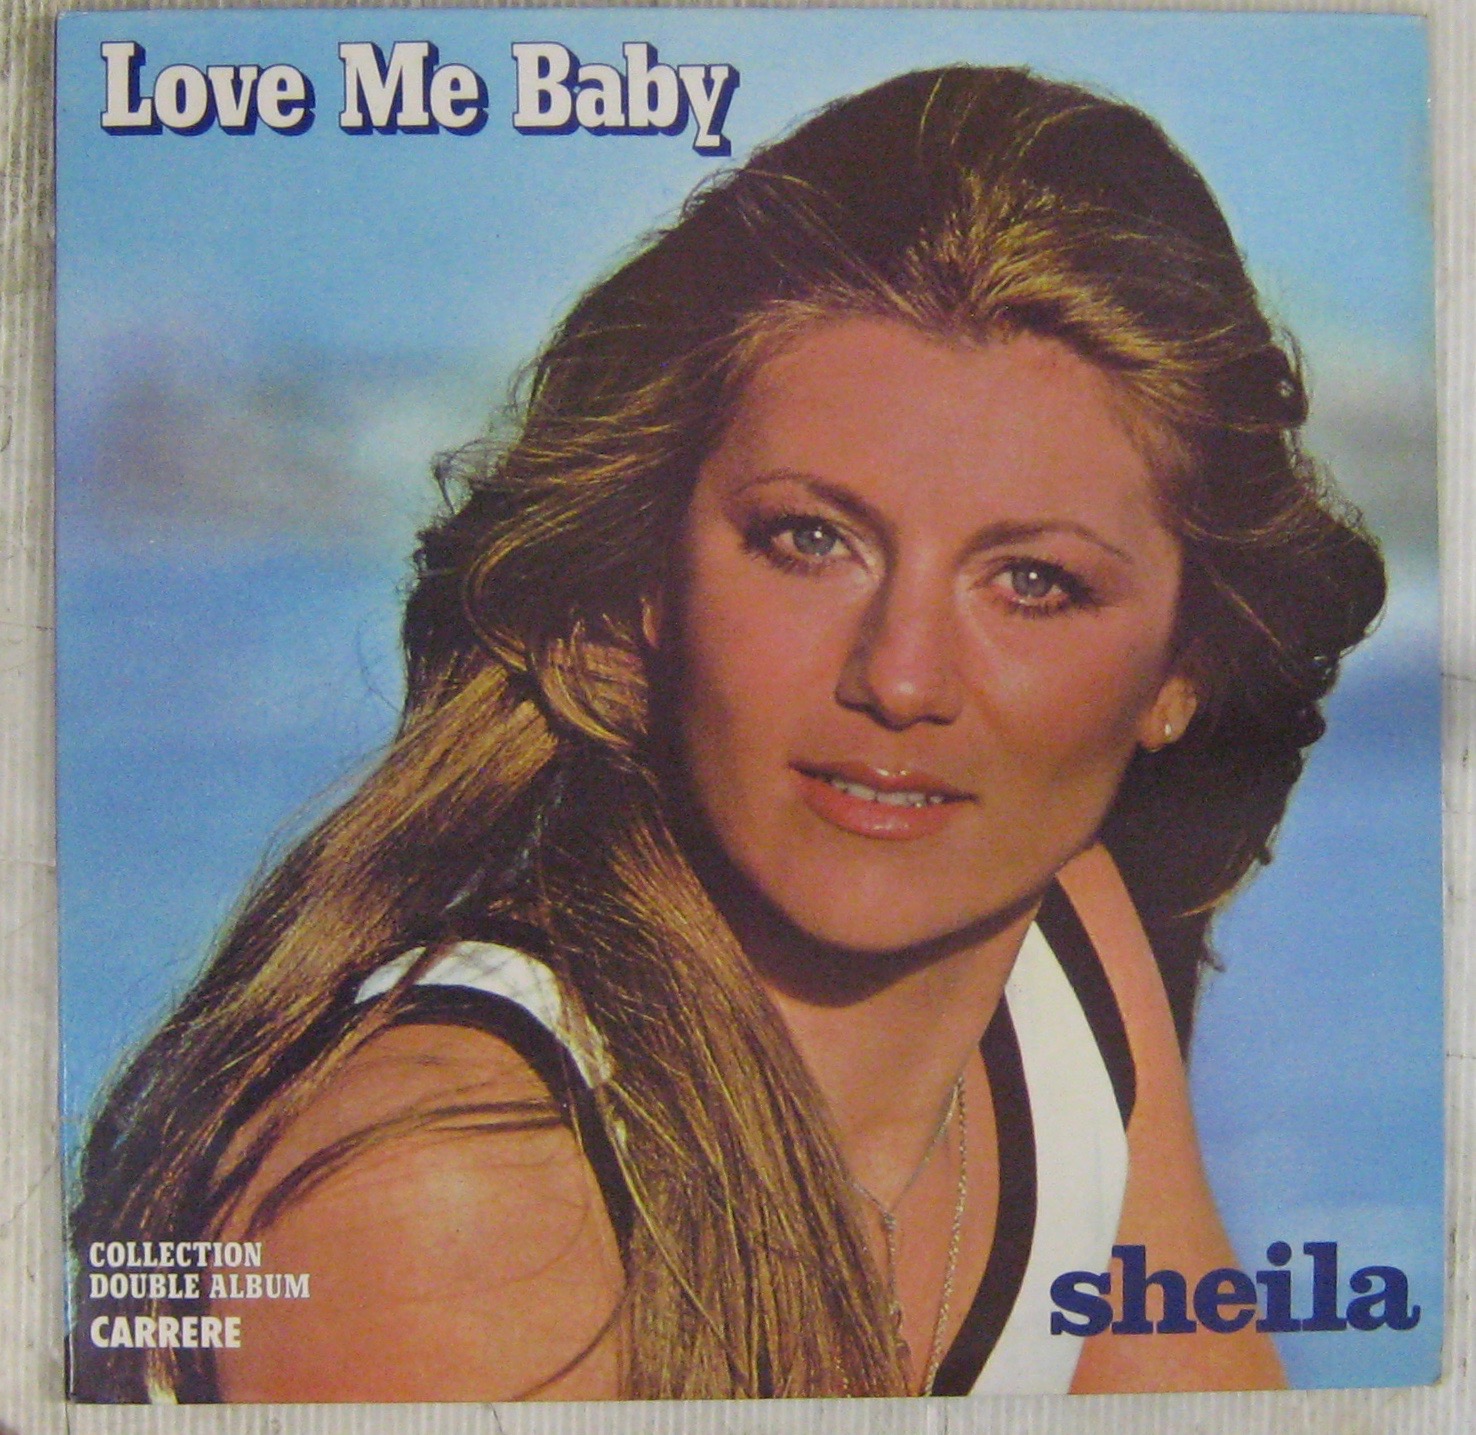 Sheila love me baby. zoom Sheila - love me baby - LP x 2. Search all items ...